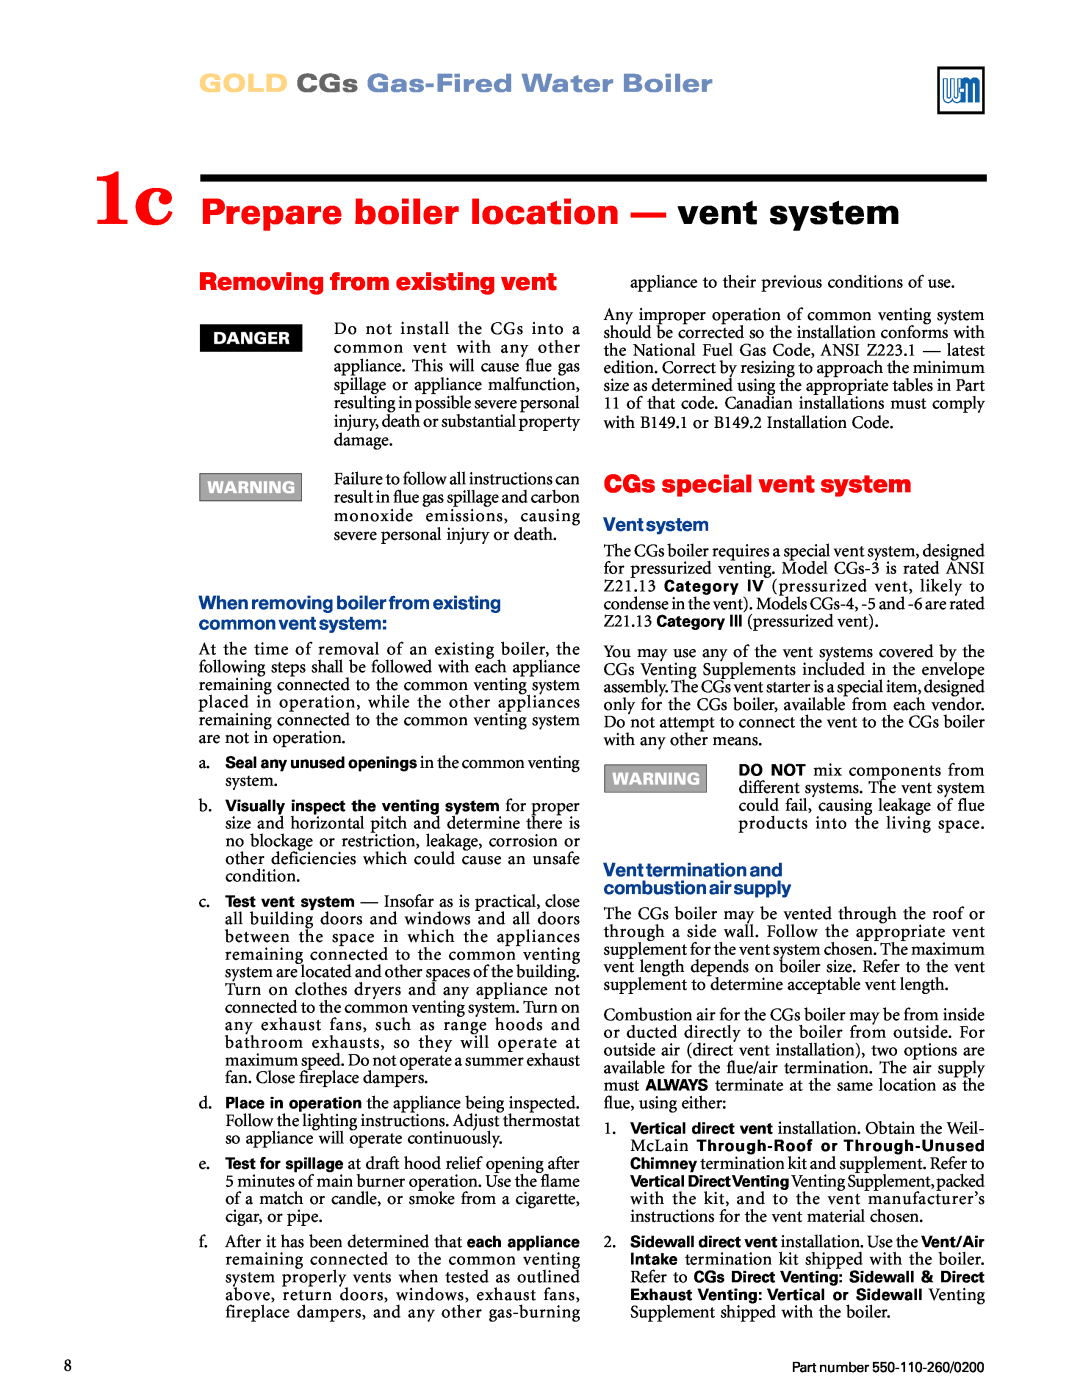 Weil-McLain 550-110-260/02002 manual 1c Prepare boiler location — vent system, Removing from existing vent, Vent system 